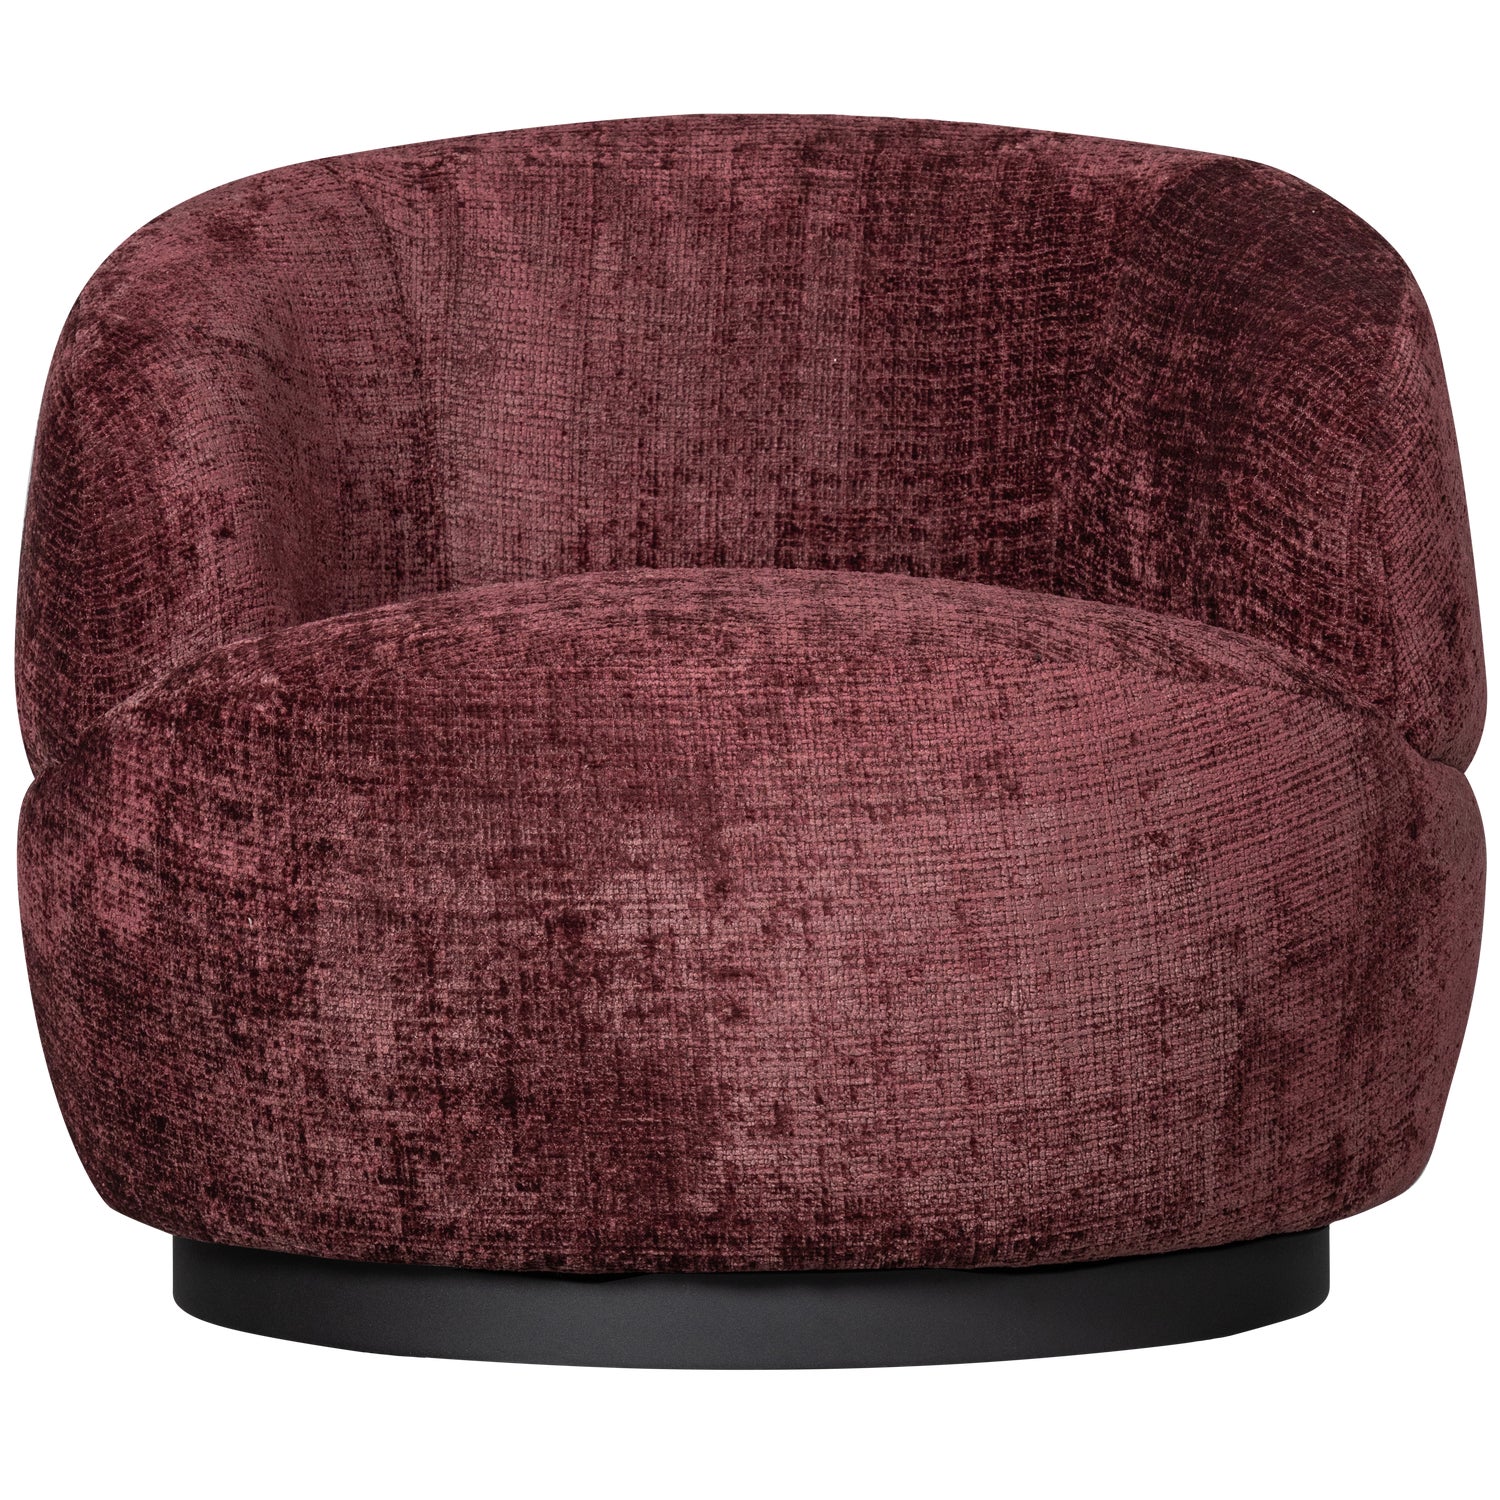 800037-A-01_VS_FA_Woolly_draaifauteuil_chenille_aubergine.png?auto=webp&format=png&width=1500&height=1500